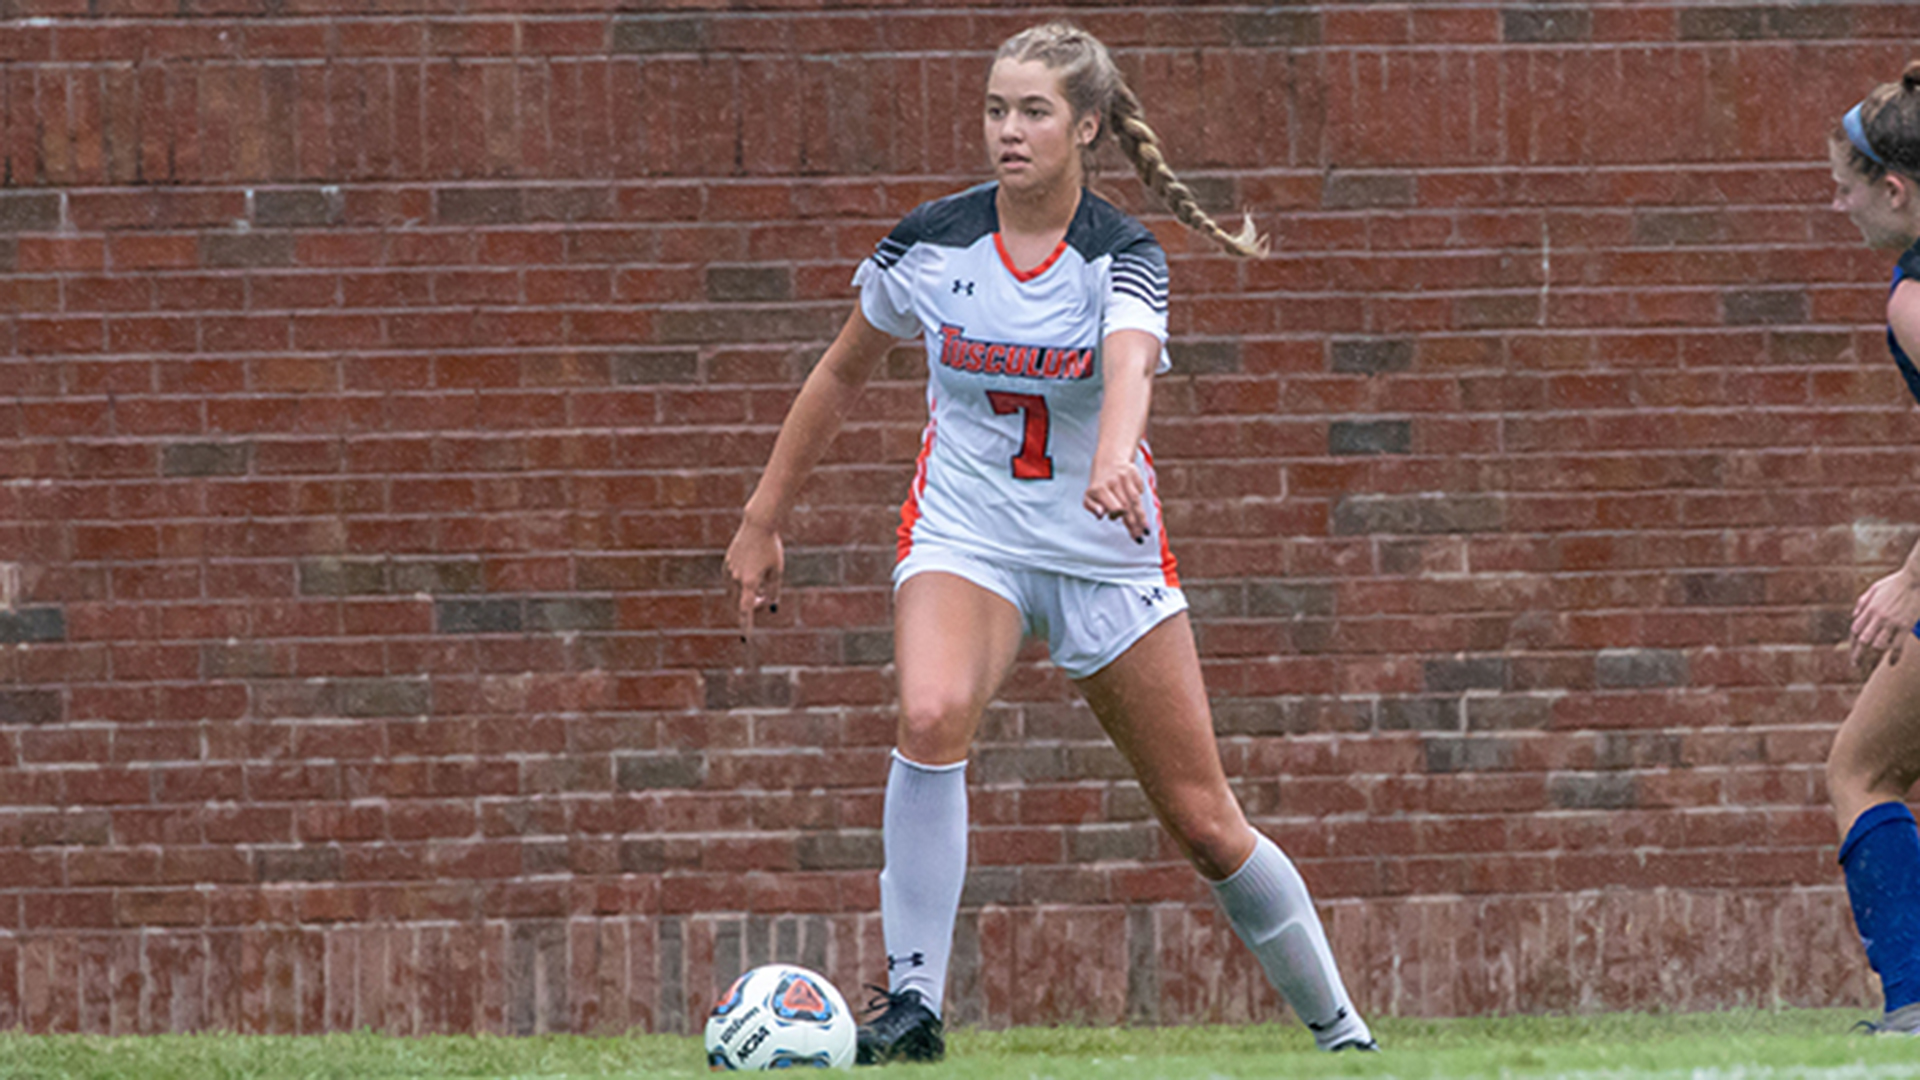 Pioneers fall 3-0 at Wingate